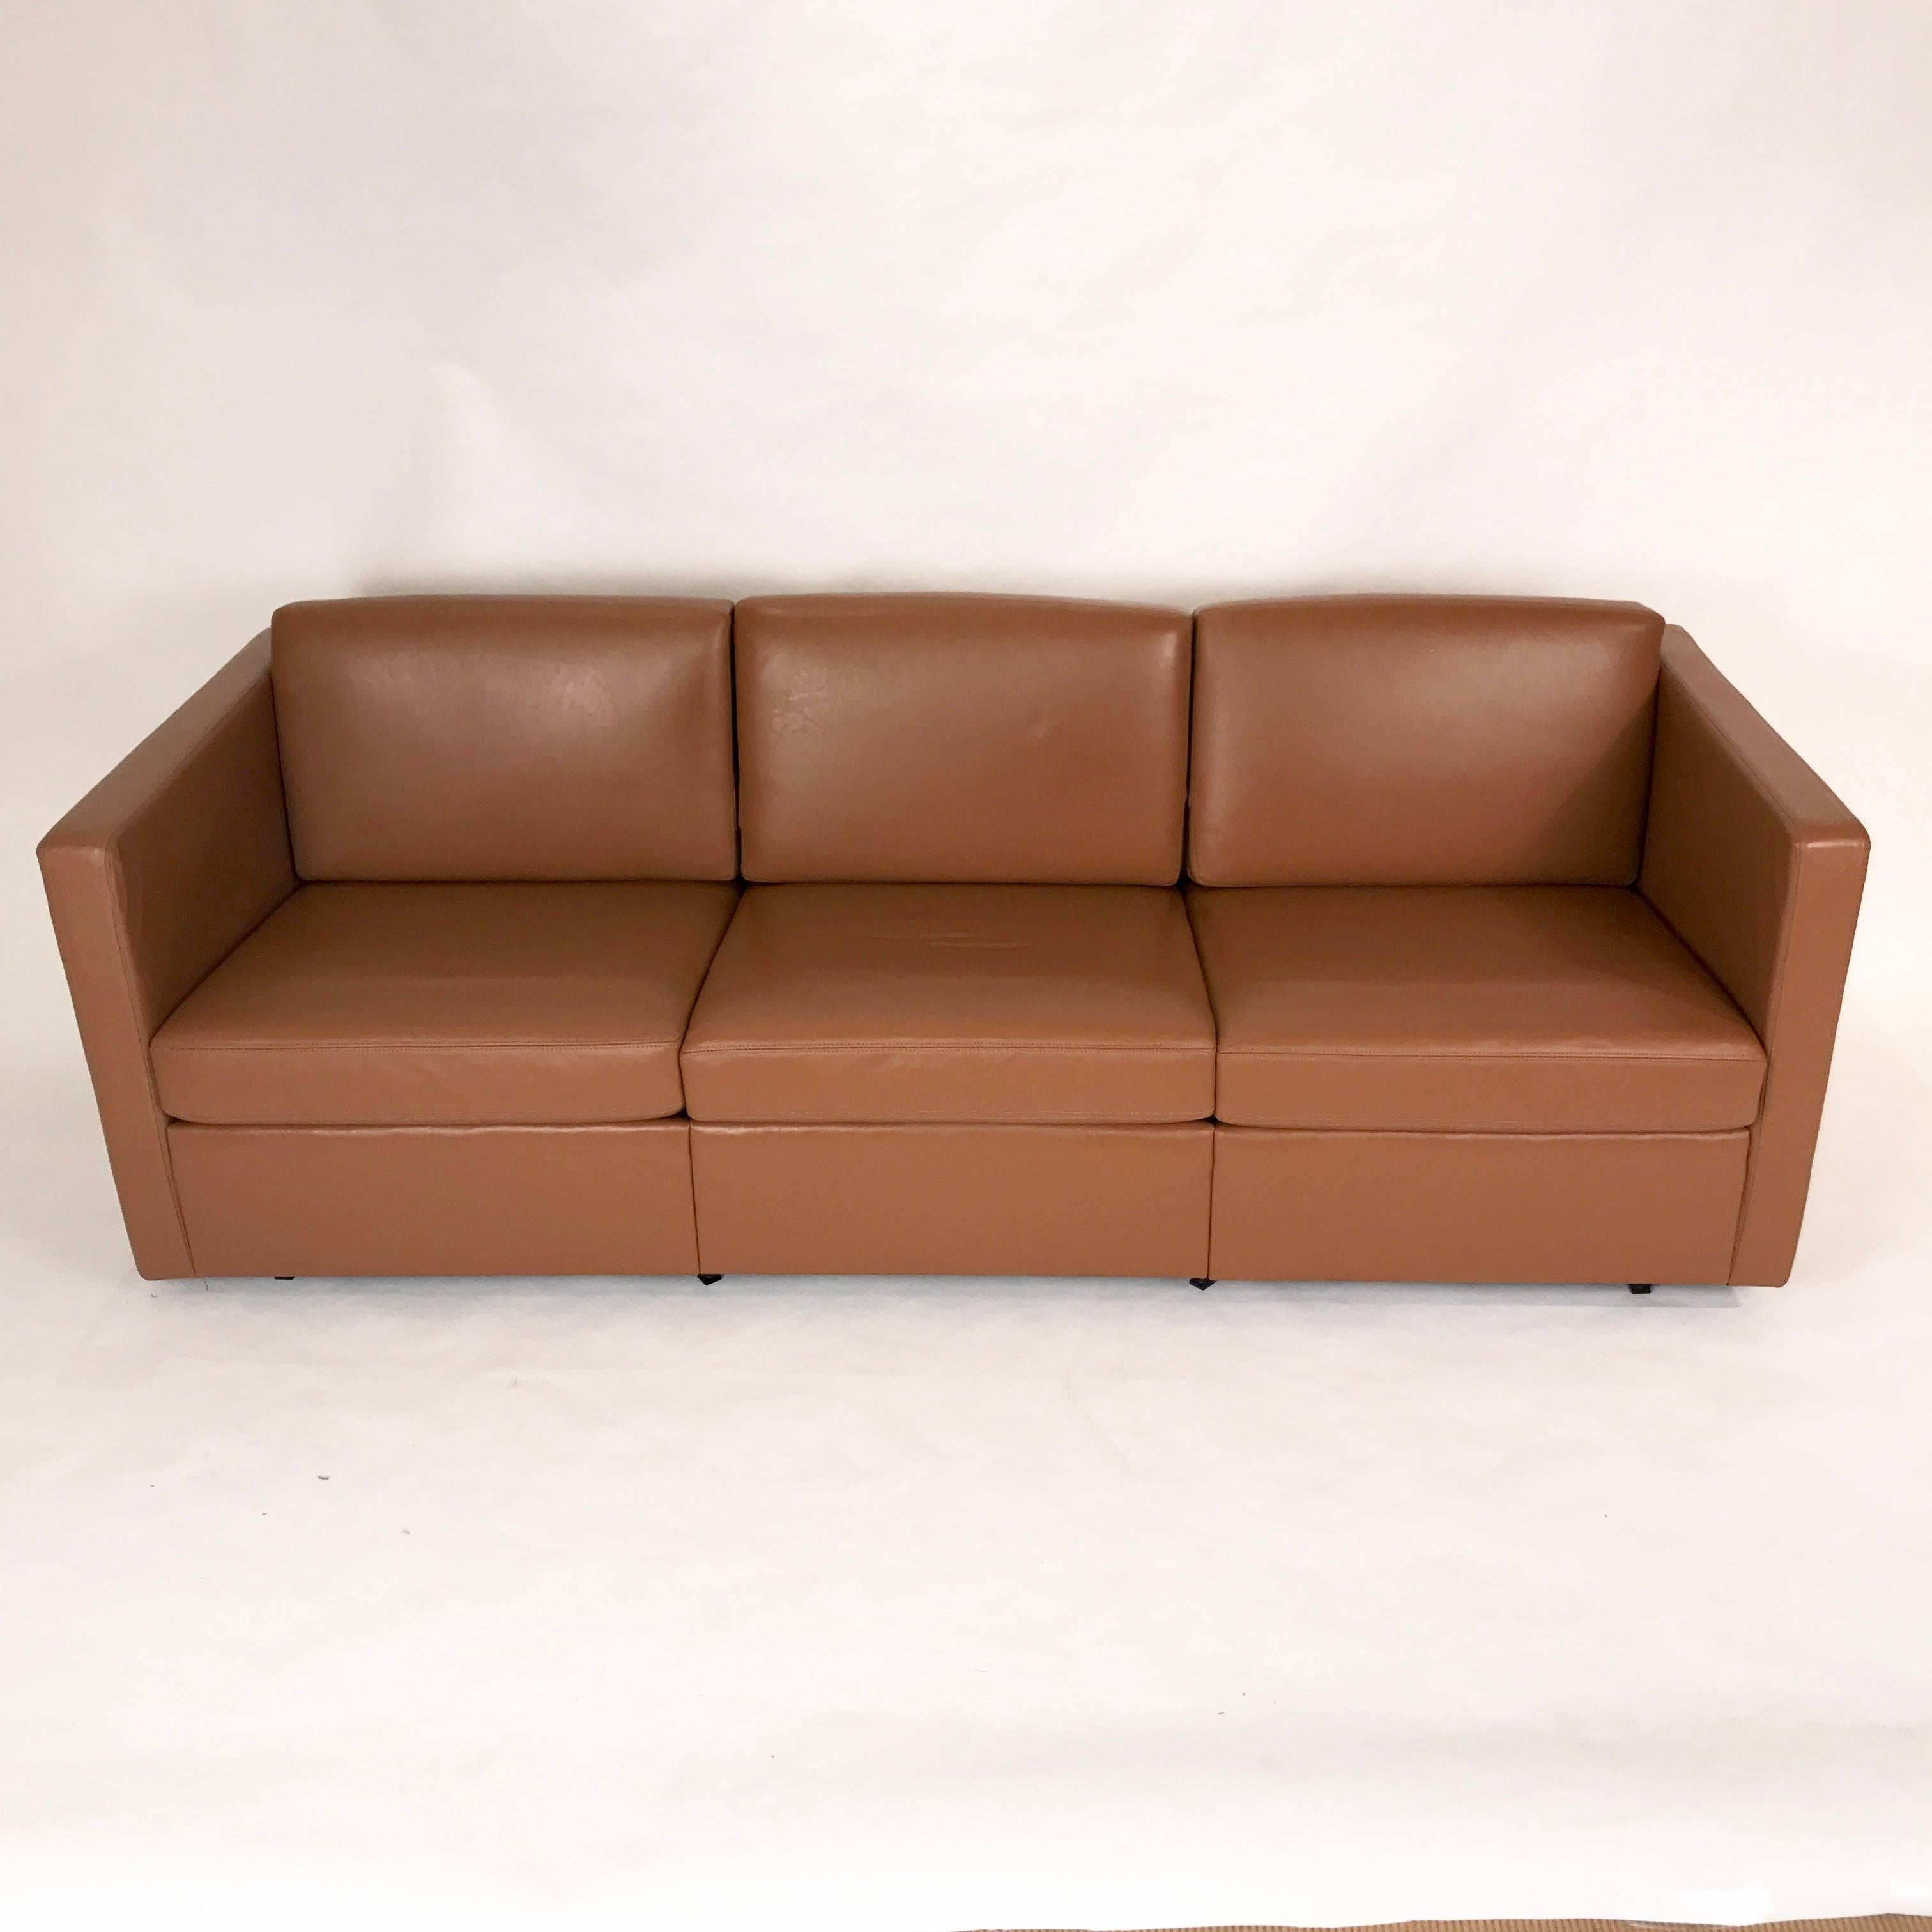 Fantastic, near excellent condition Charles Pfister for Knoll three-seat sofa in a sturdy carmel colored leather with lovely box stitched edges all around. Steel feet.